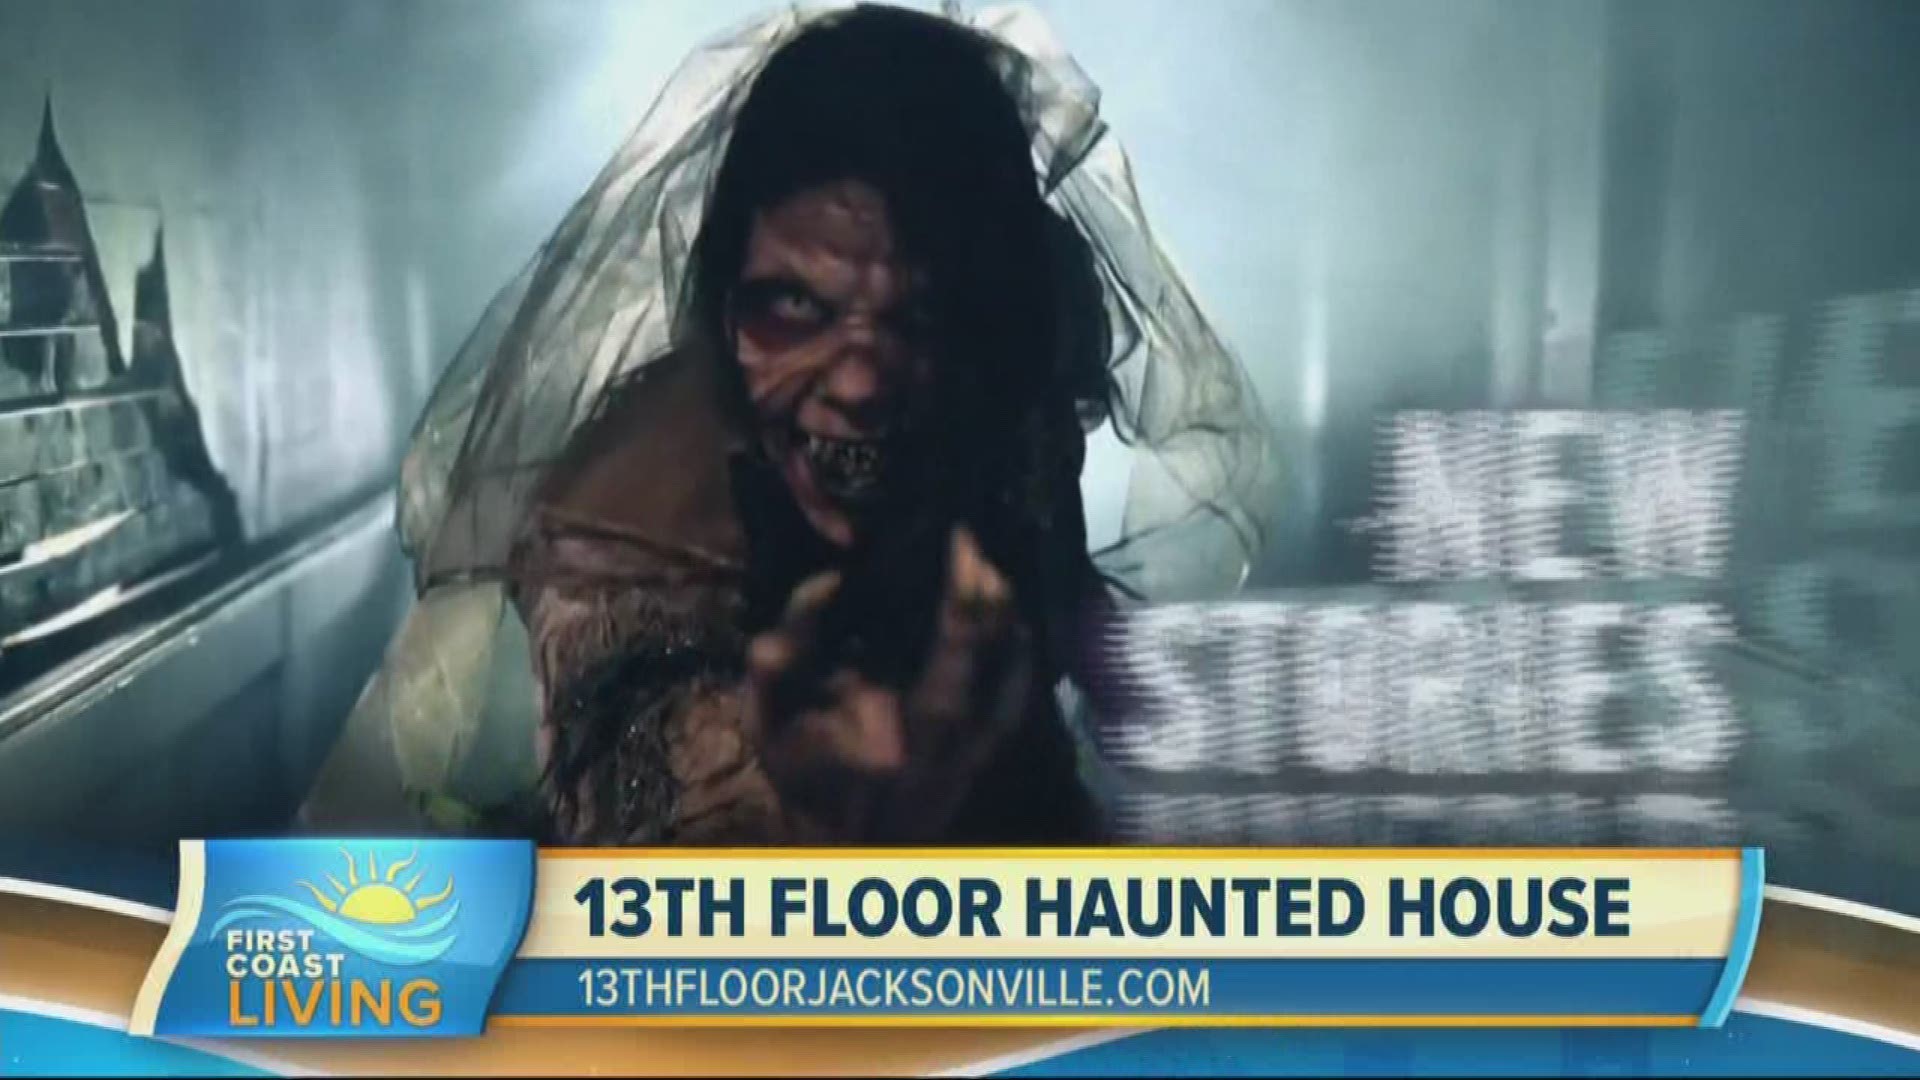 Scary has never been so fun for visitors of the 13th Floor.